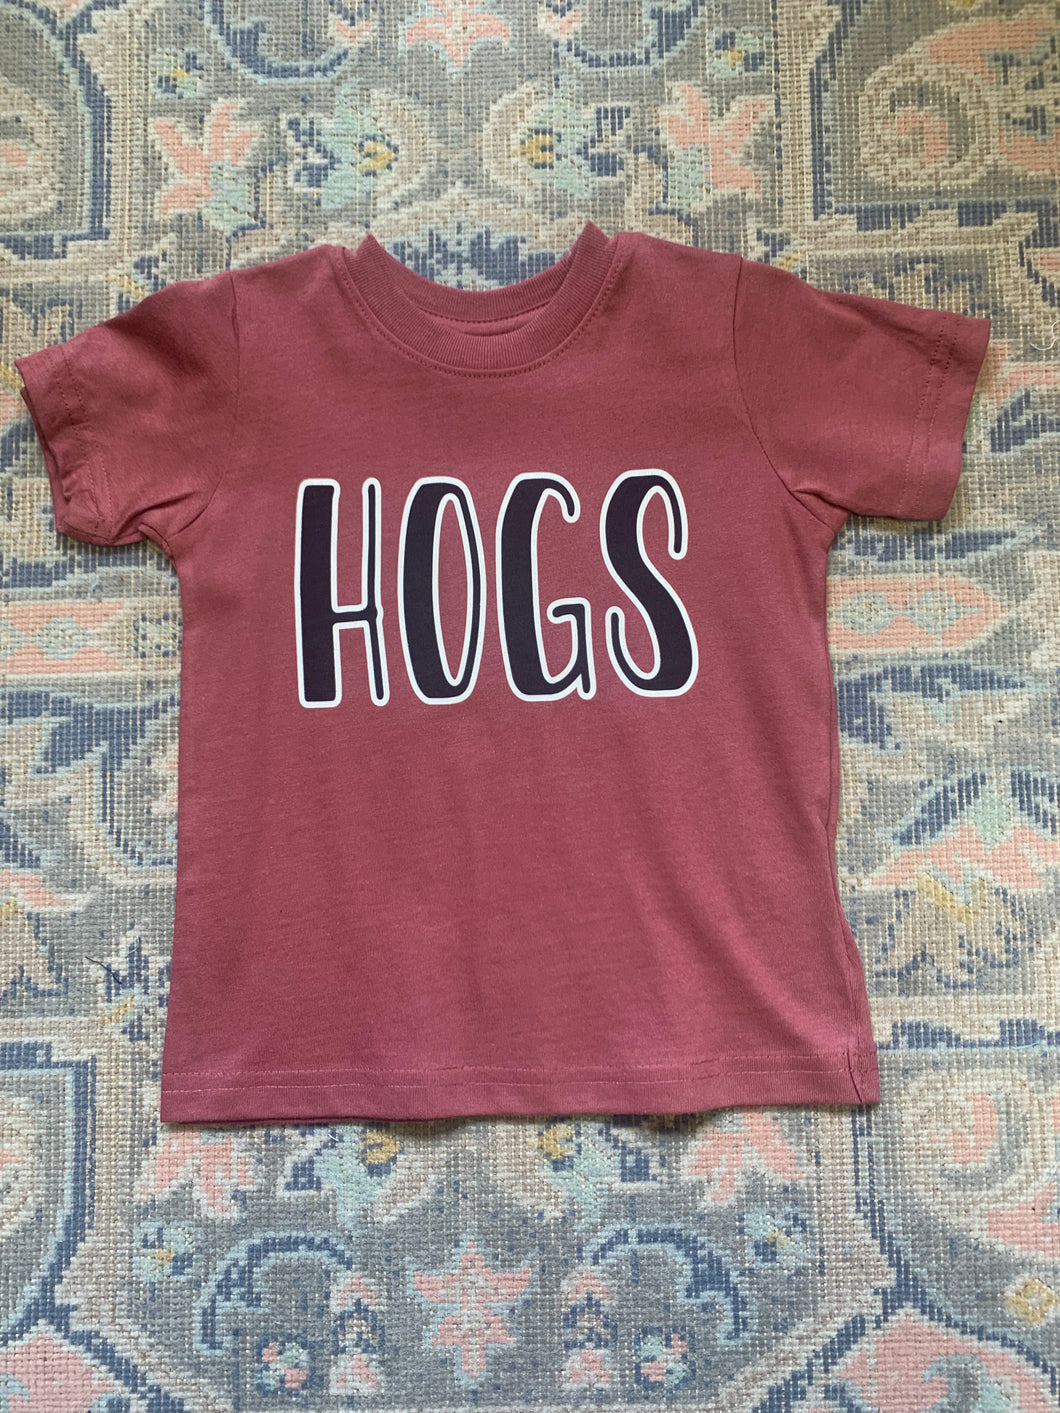 Life In The South- HOGS Tee